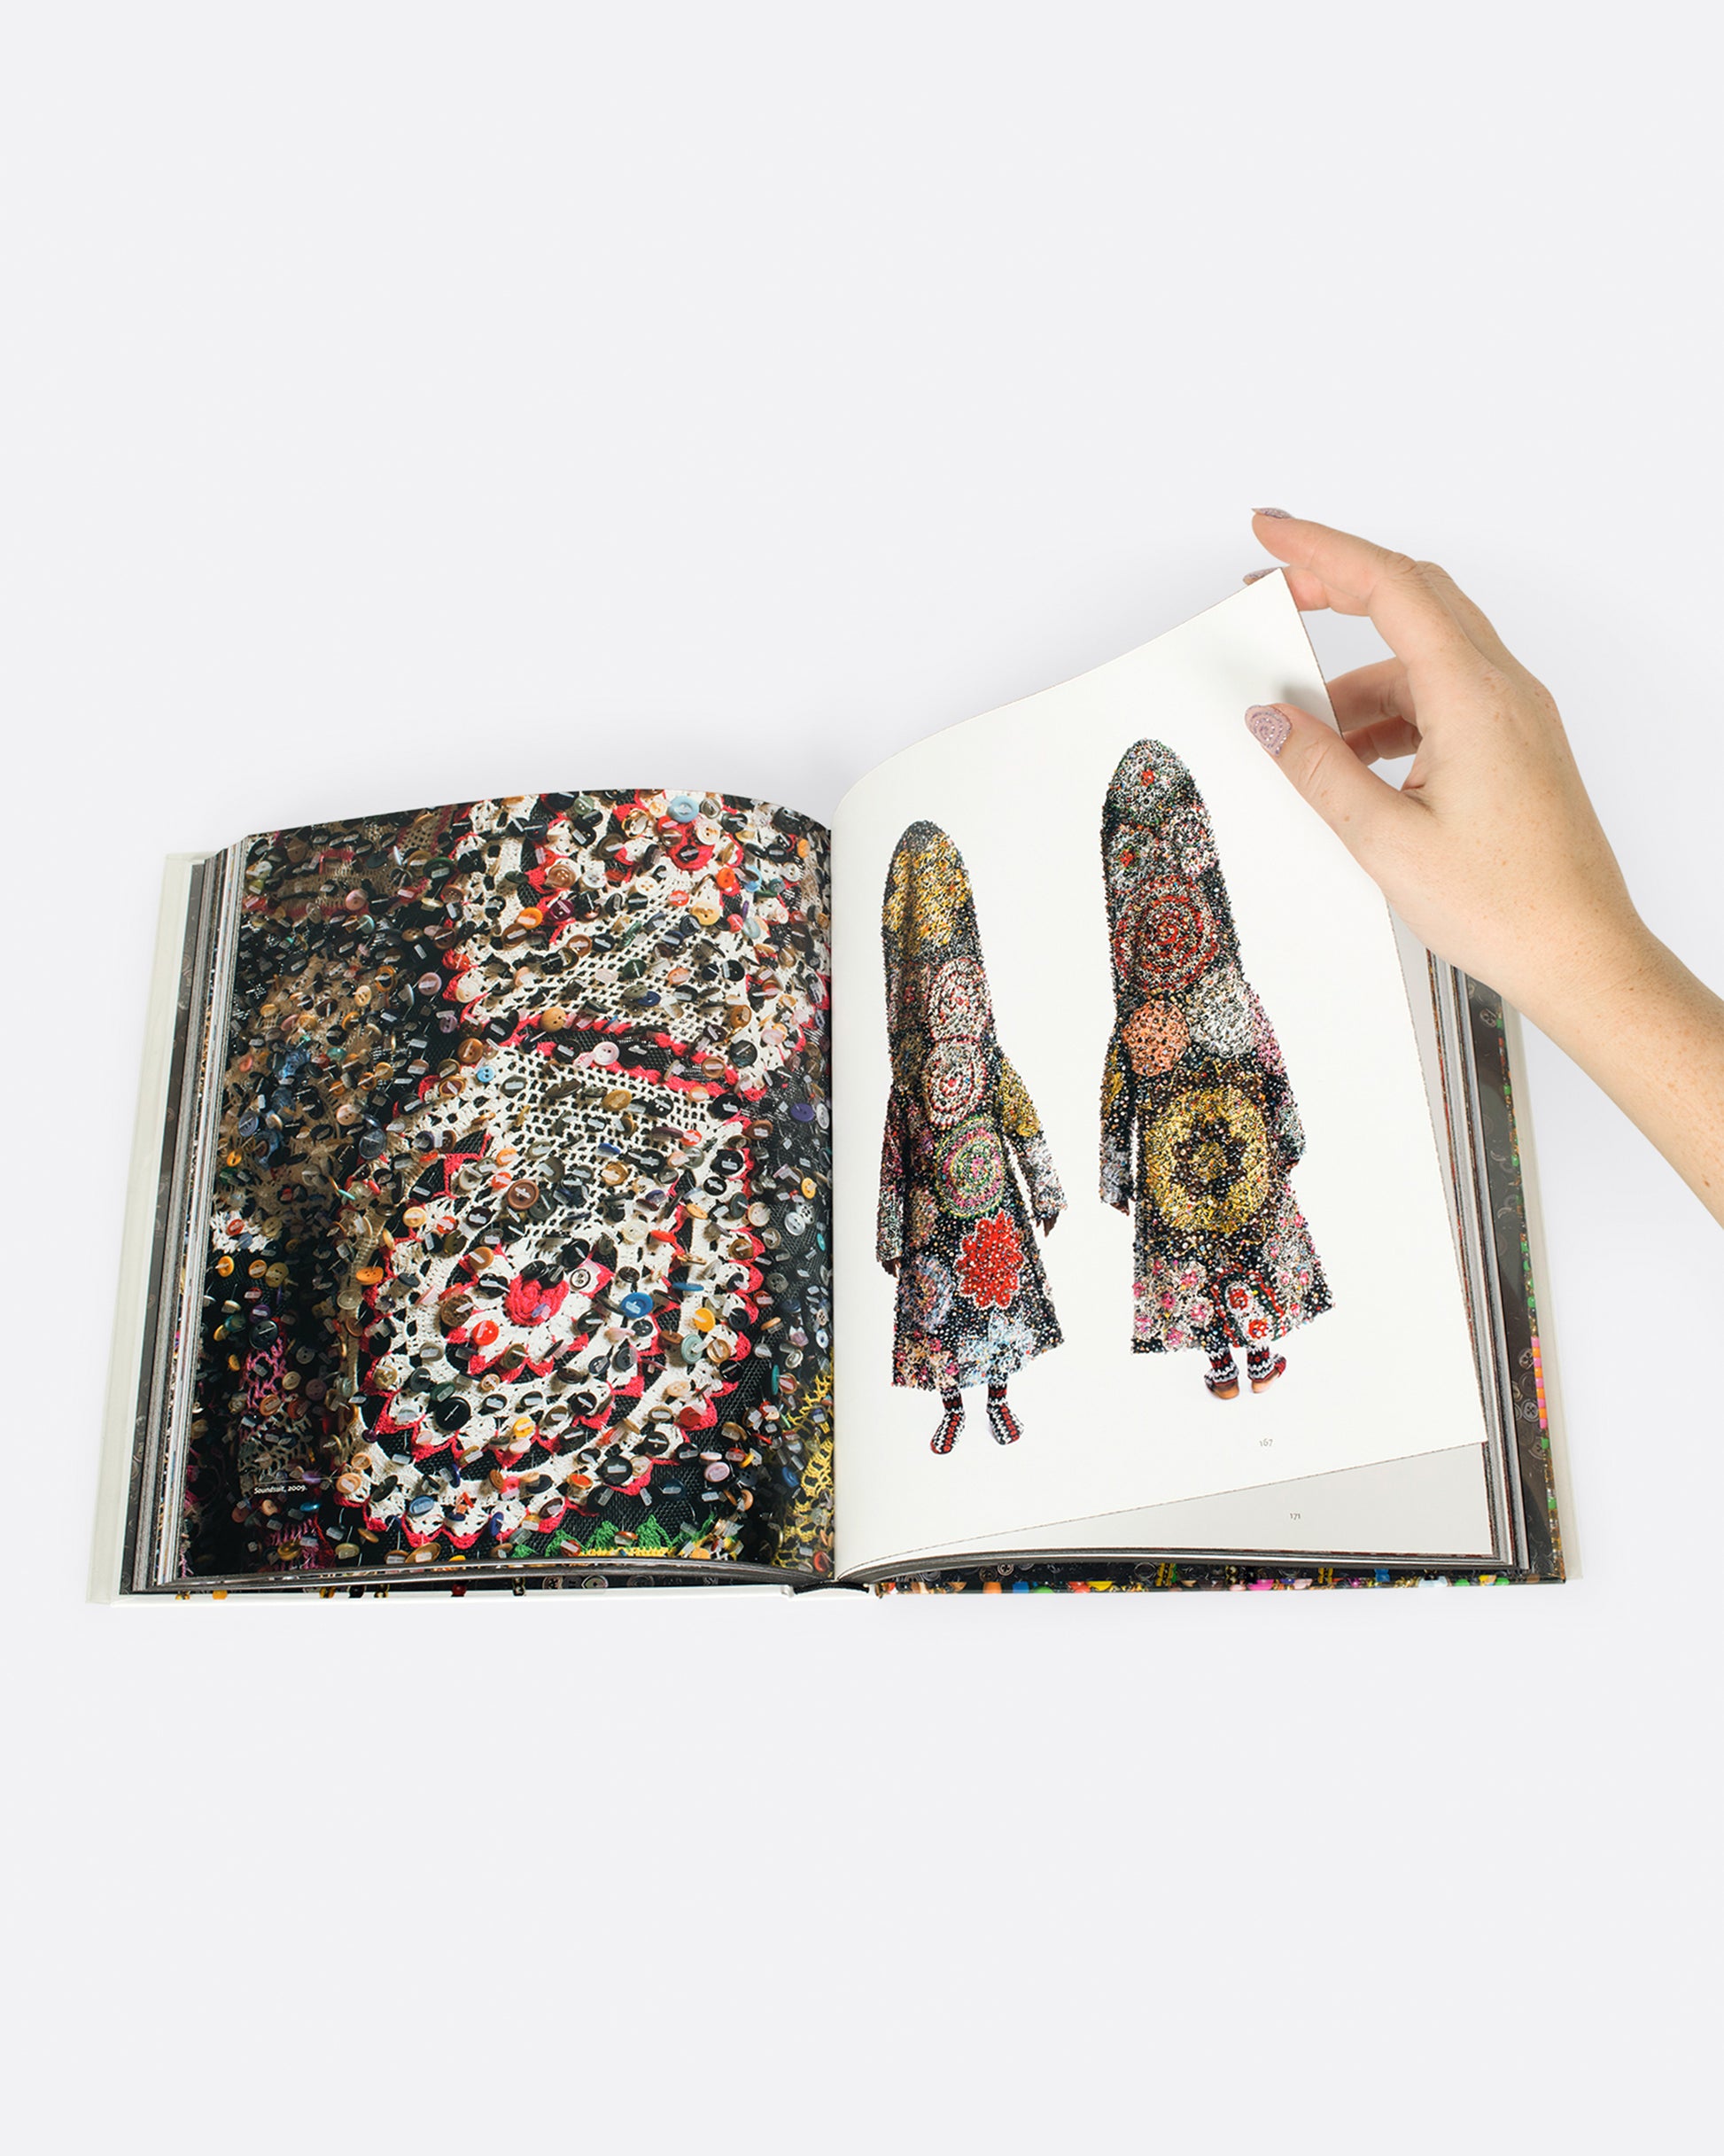 Nick Cave: FOROTHERMORE book, shown open.